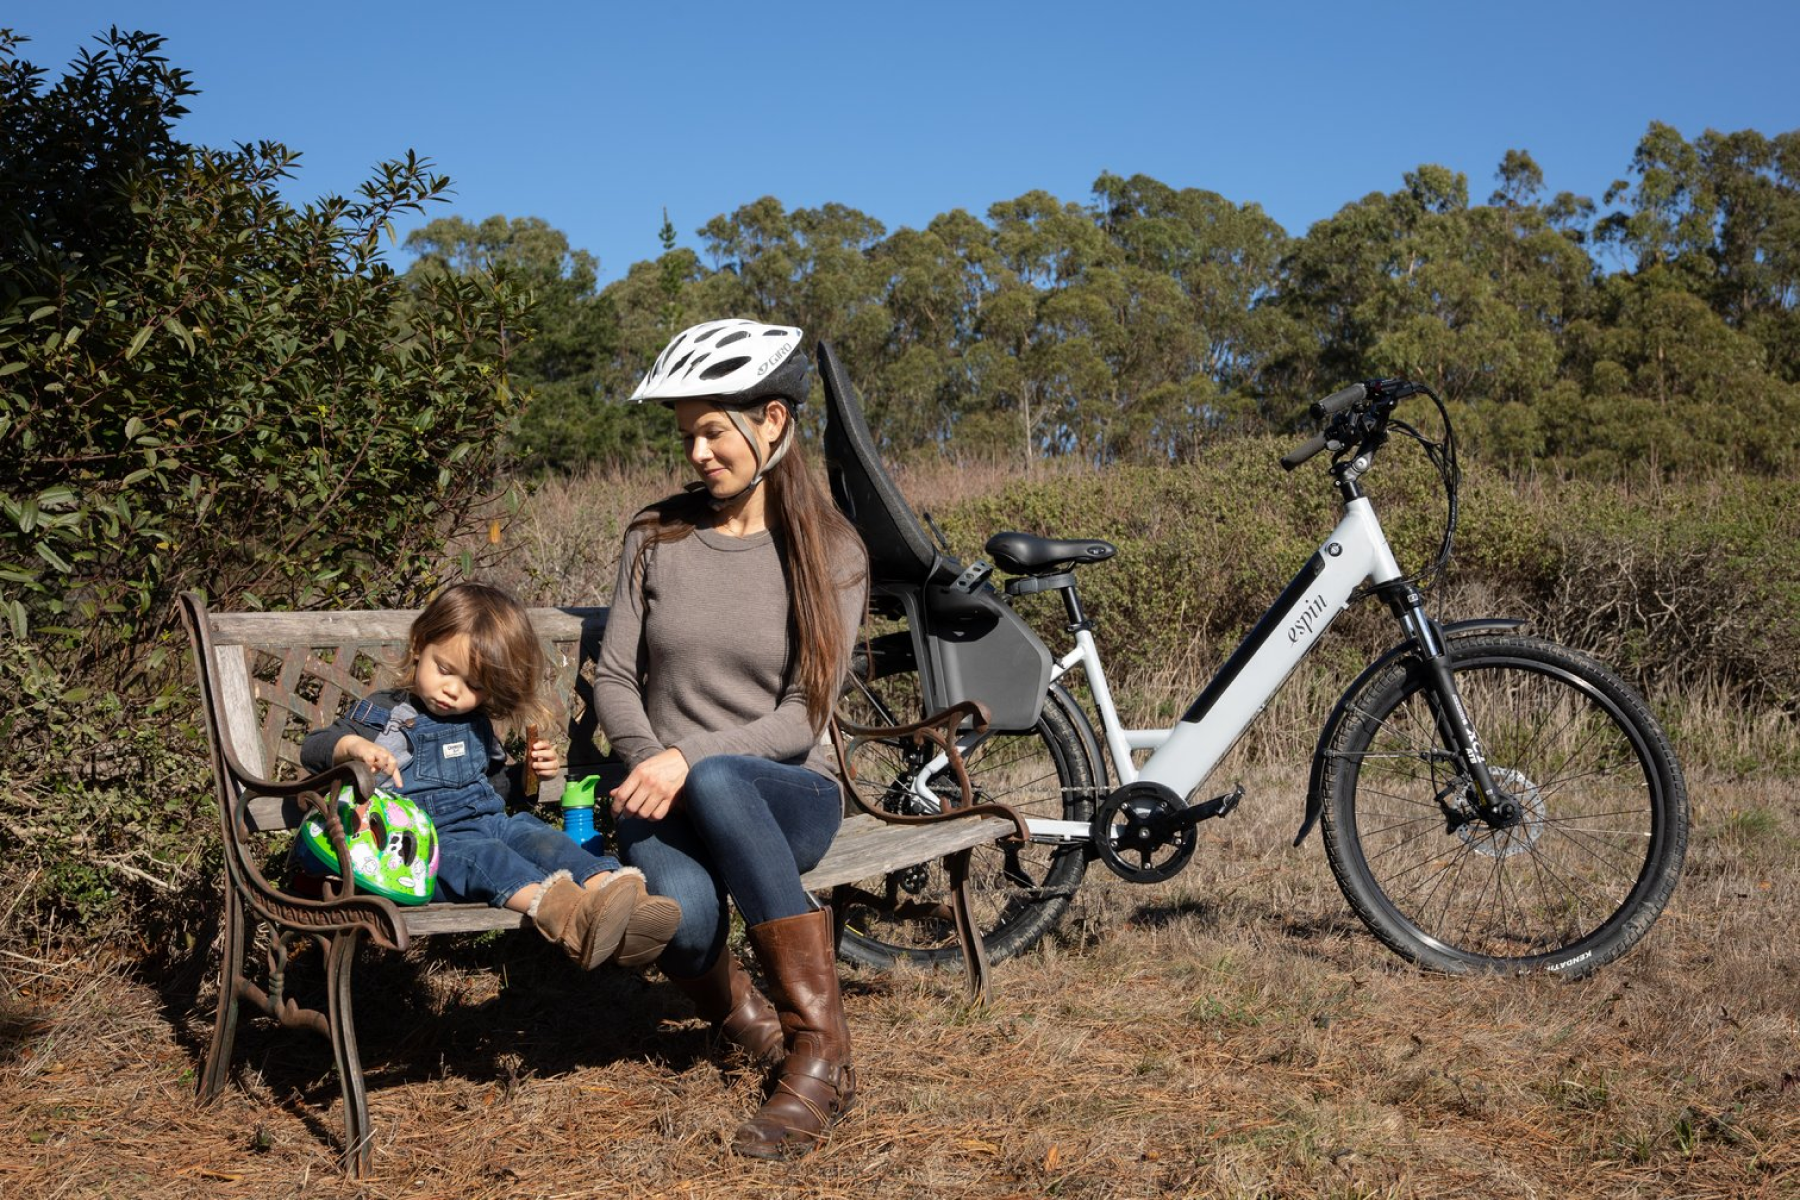 How Electric Bikes Can Let You Spend More Time with Your Family This Summer